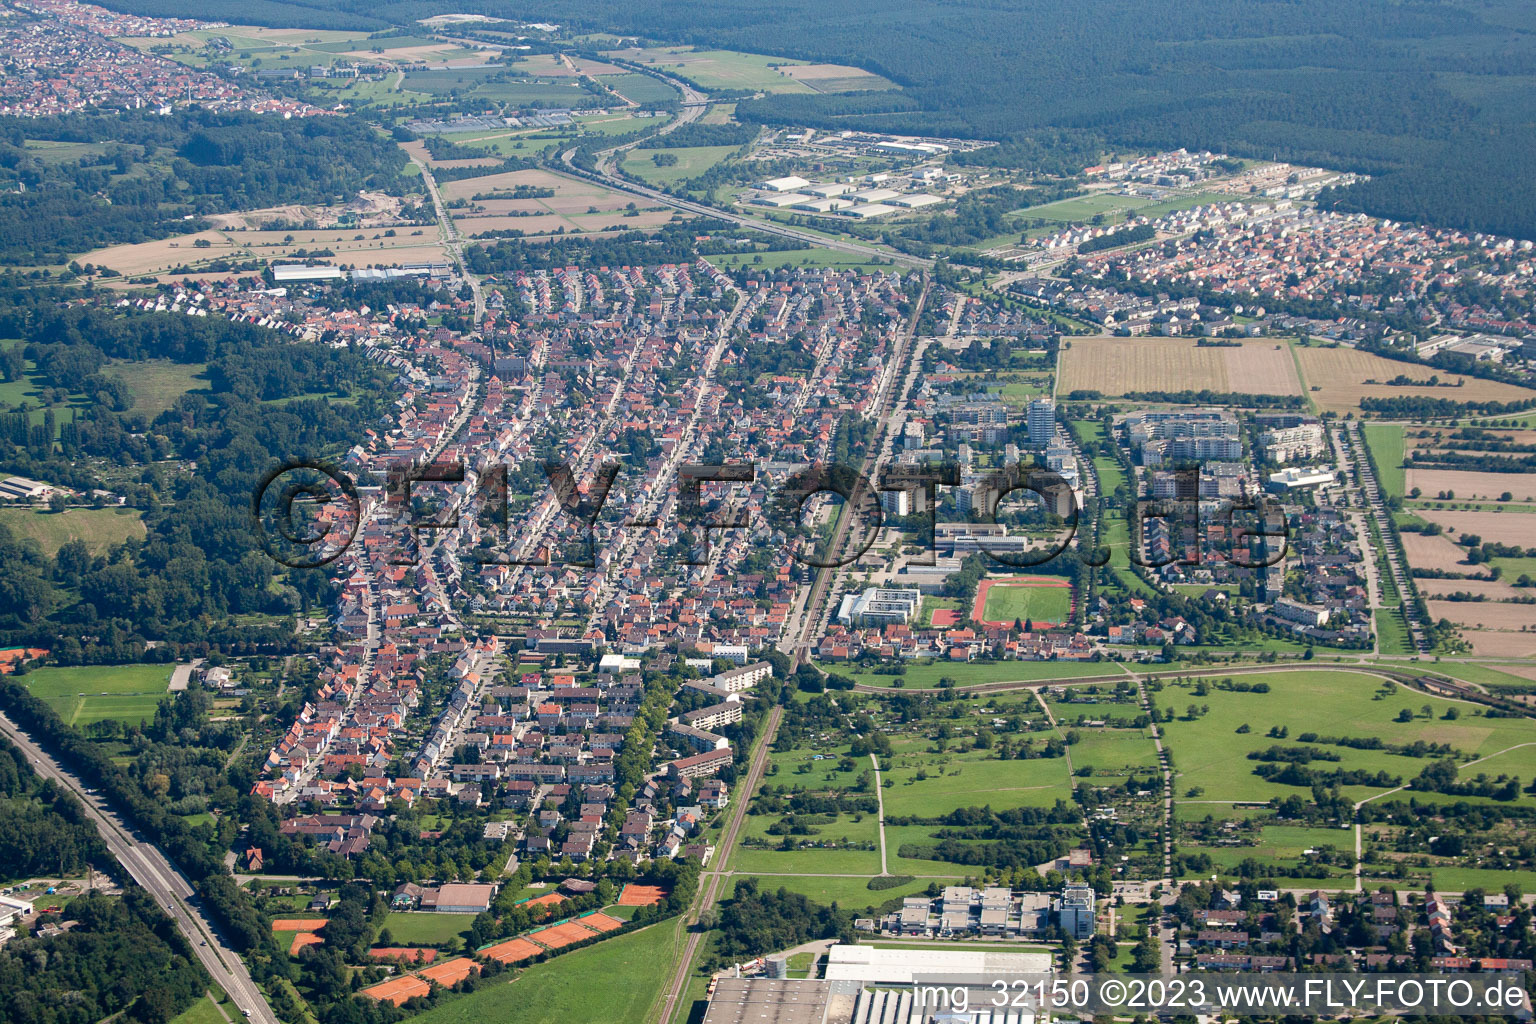 From the south in the district Neureut in Karlsruhe in the state Baden-Wuerttemberg, Germany